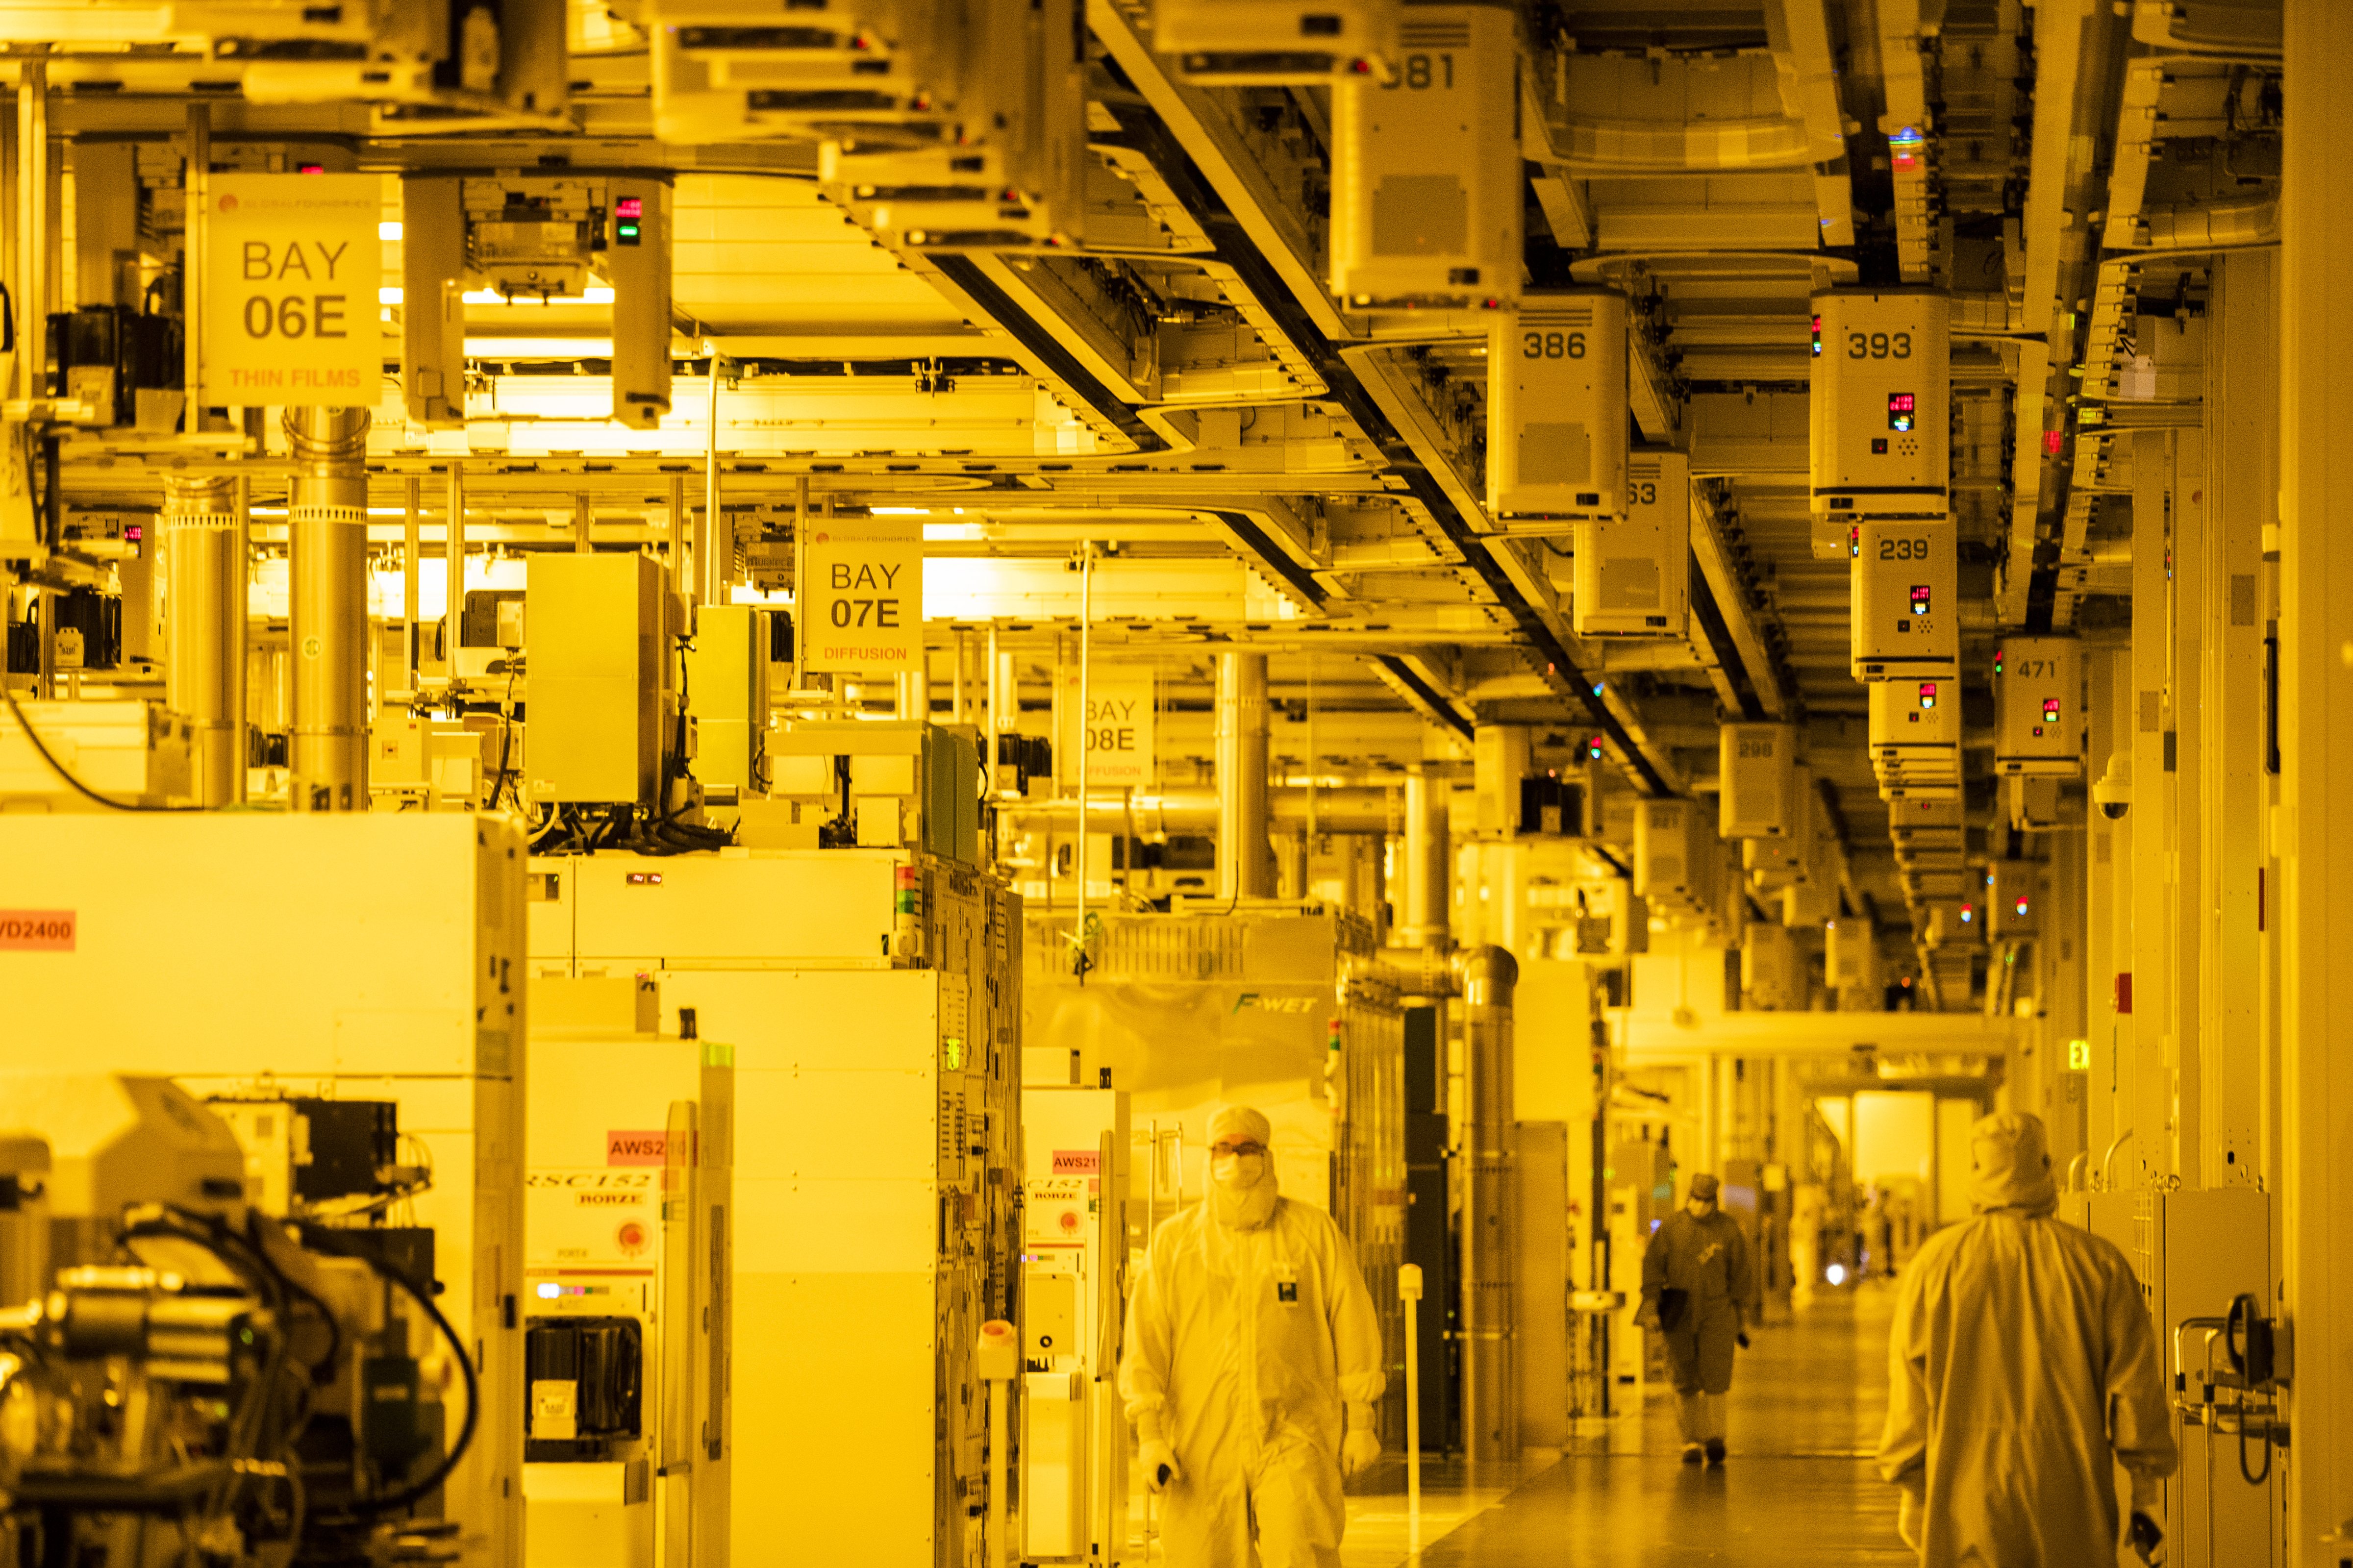 Inside the GlobalFoundries semiconductor manufacturing facility in Malta, N.Y. on Tuesday, March 16, 2021. (Adam Glanzman—Bloomberg via Getty Images)